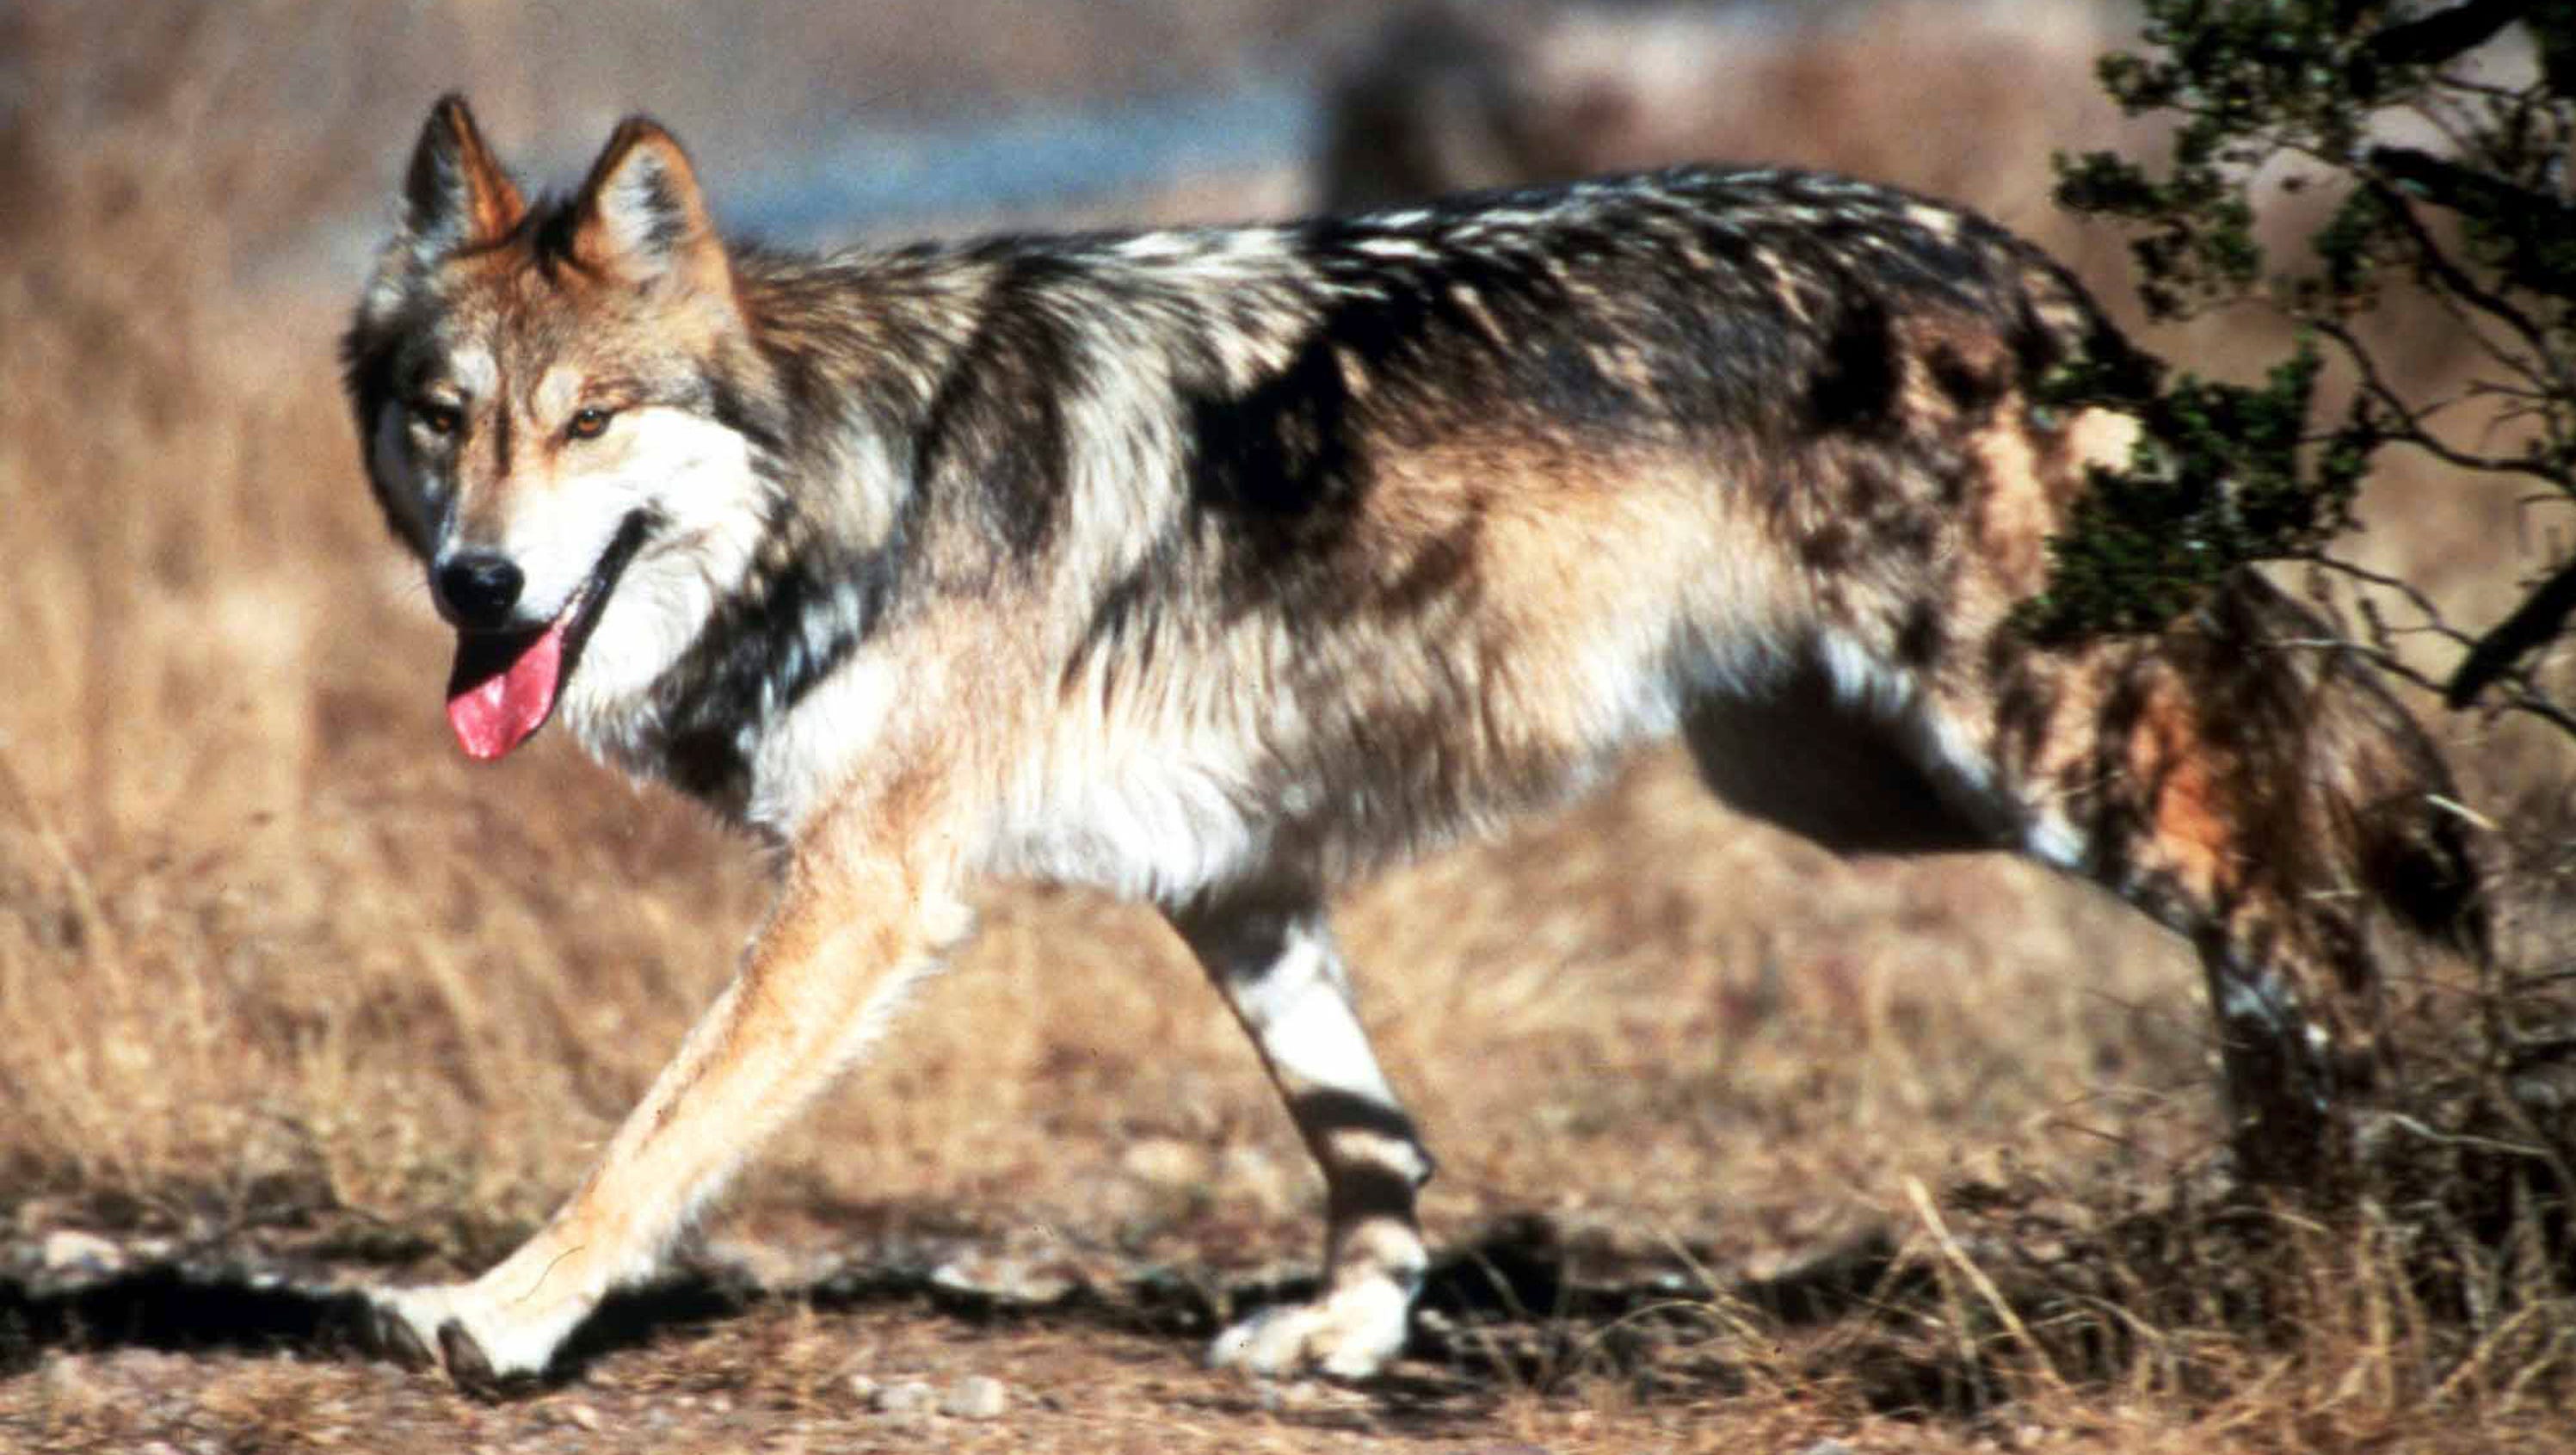 Trump officials end gray wolf protections except for Mexican gray wolf